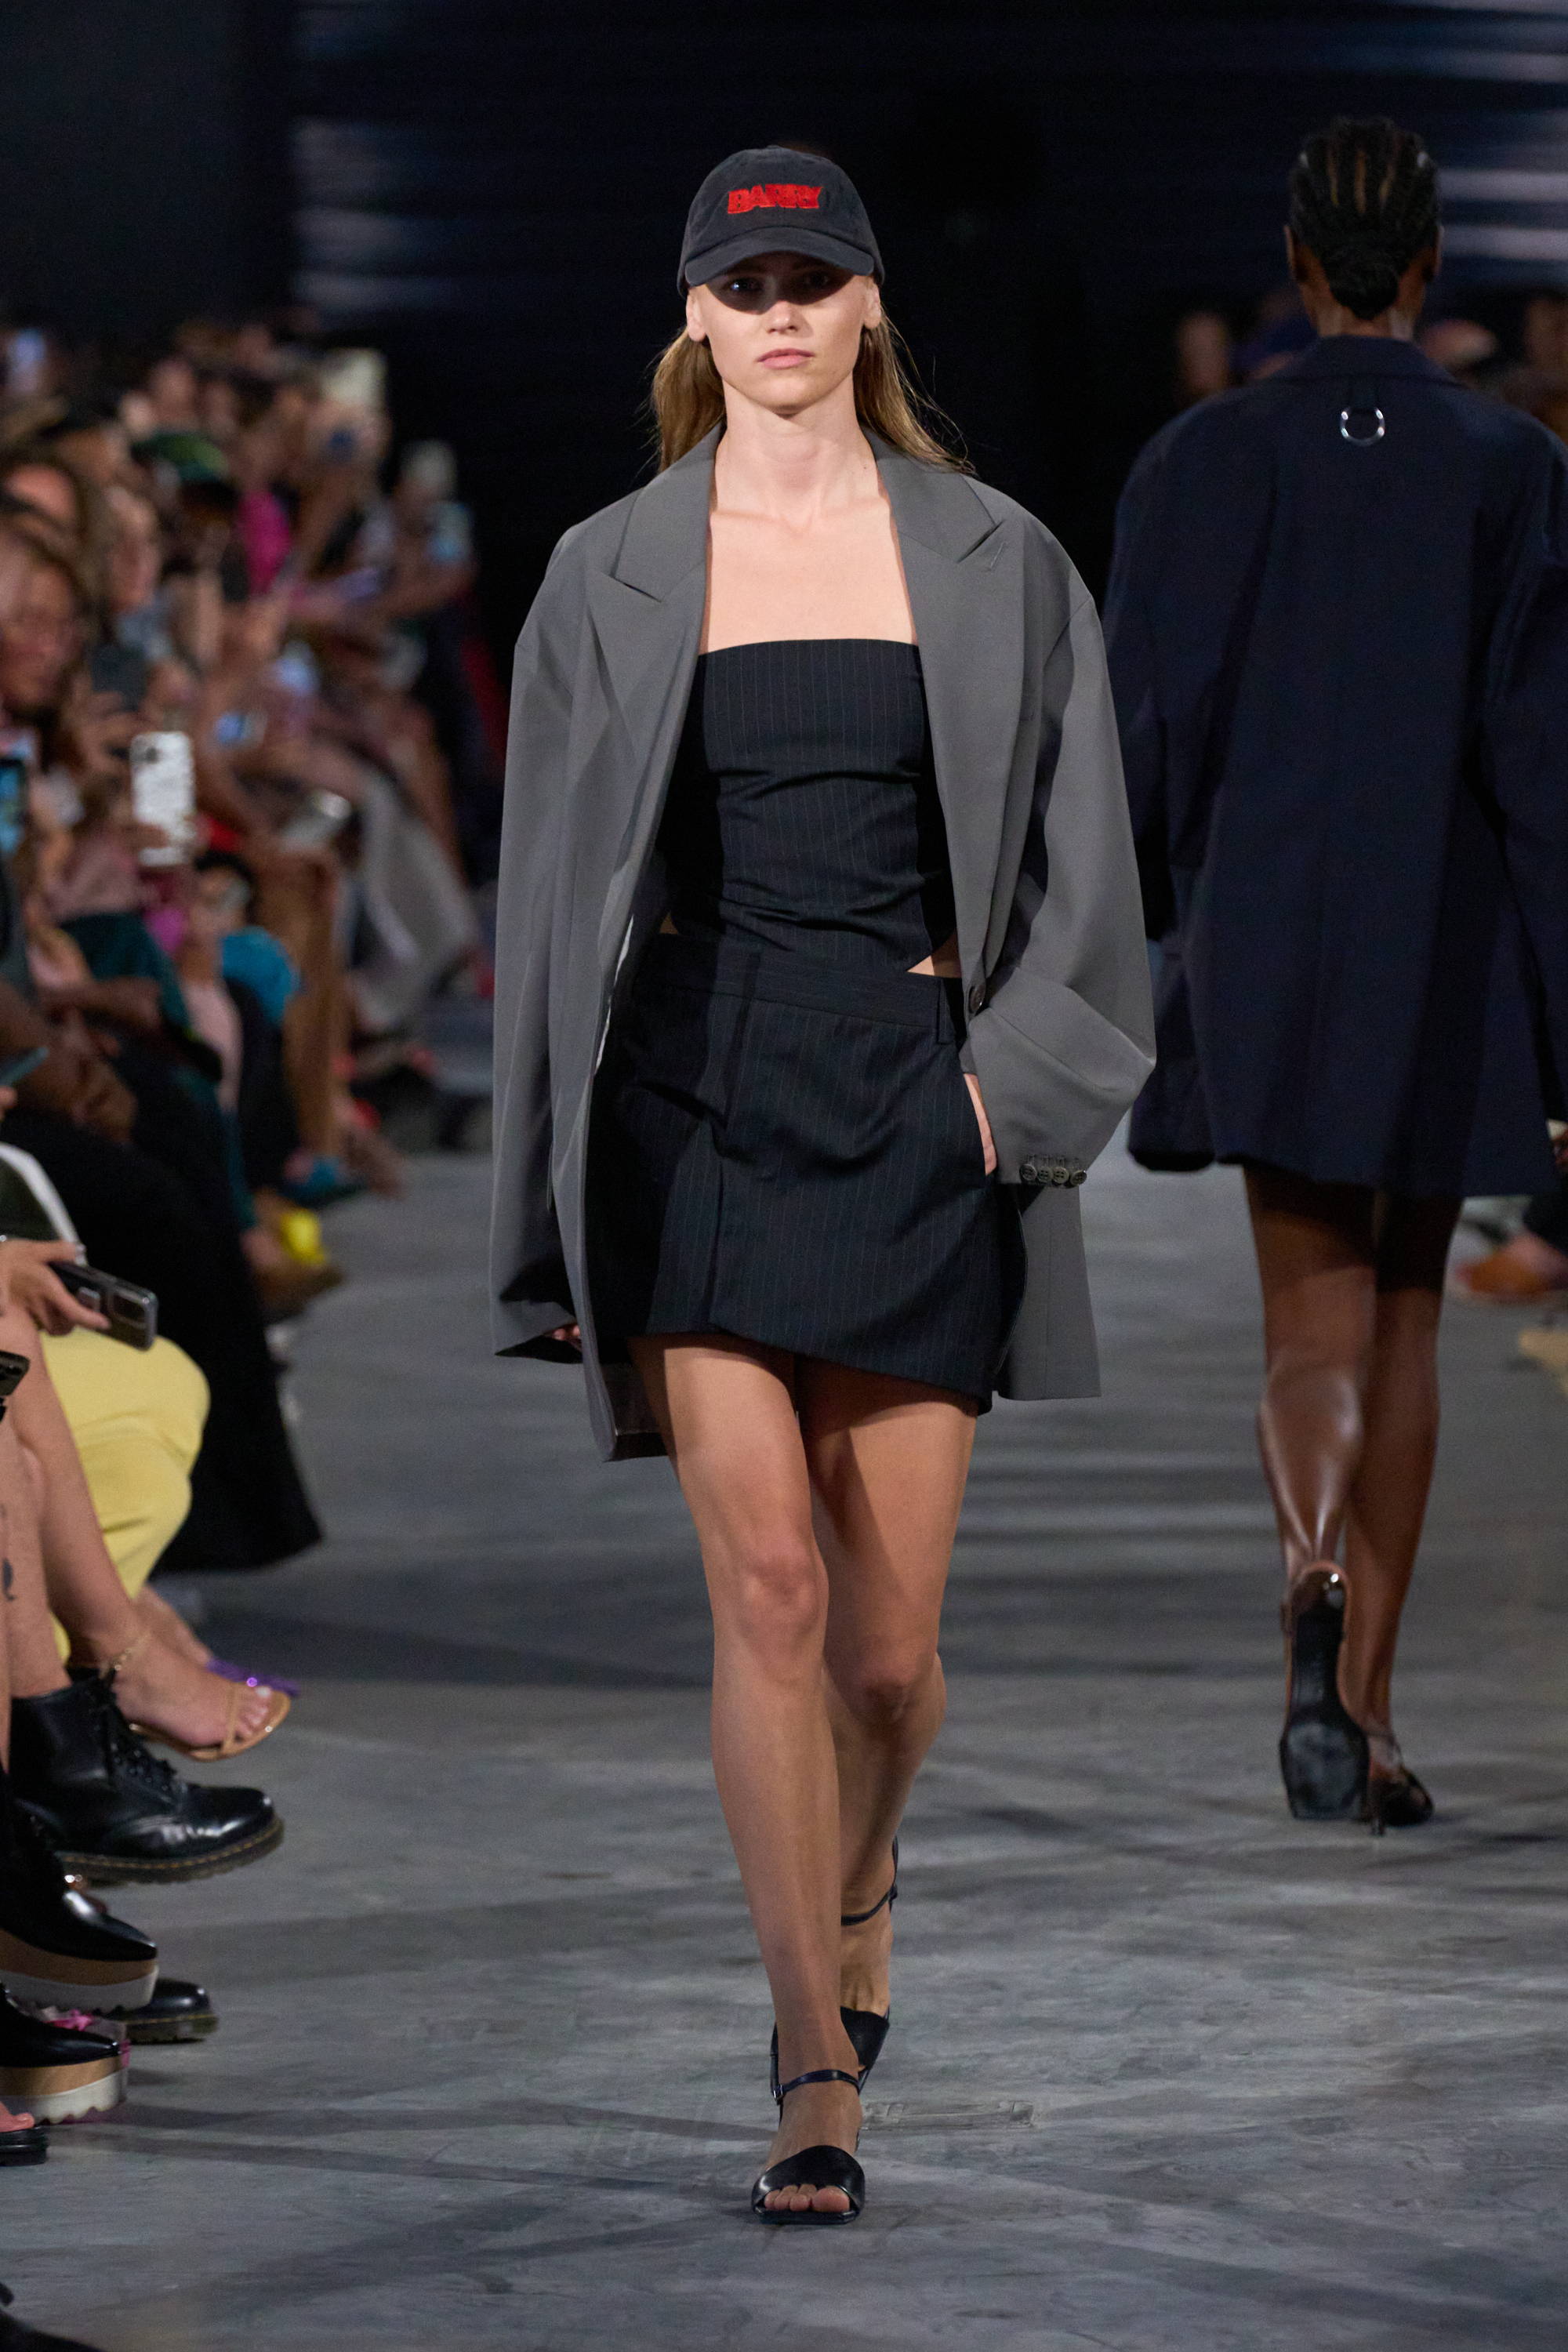 Model on a runway wearing cap, top, skirt, and blazer